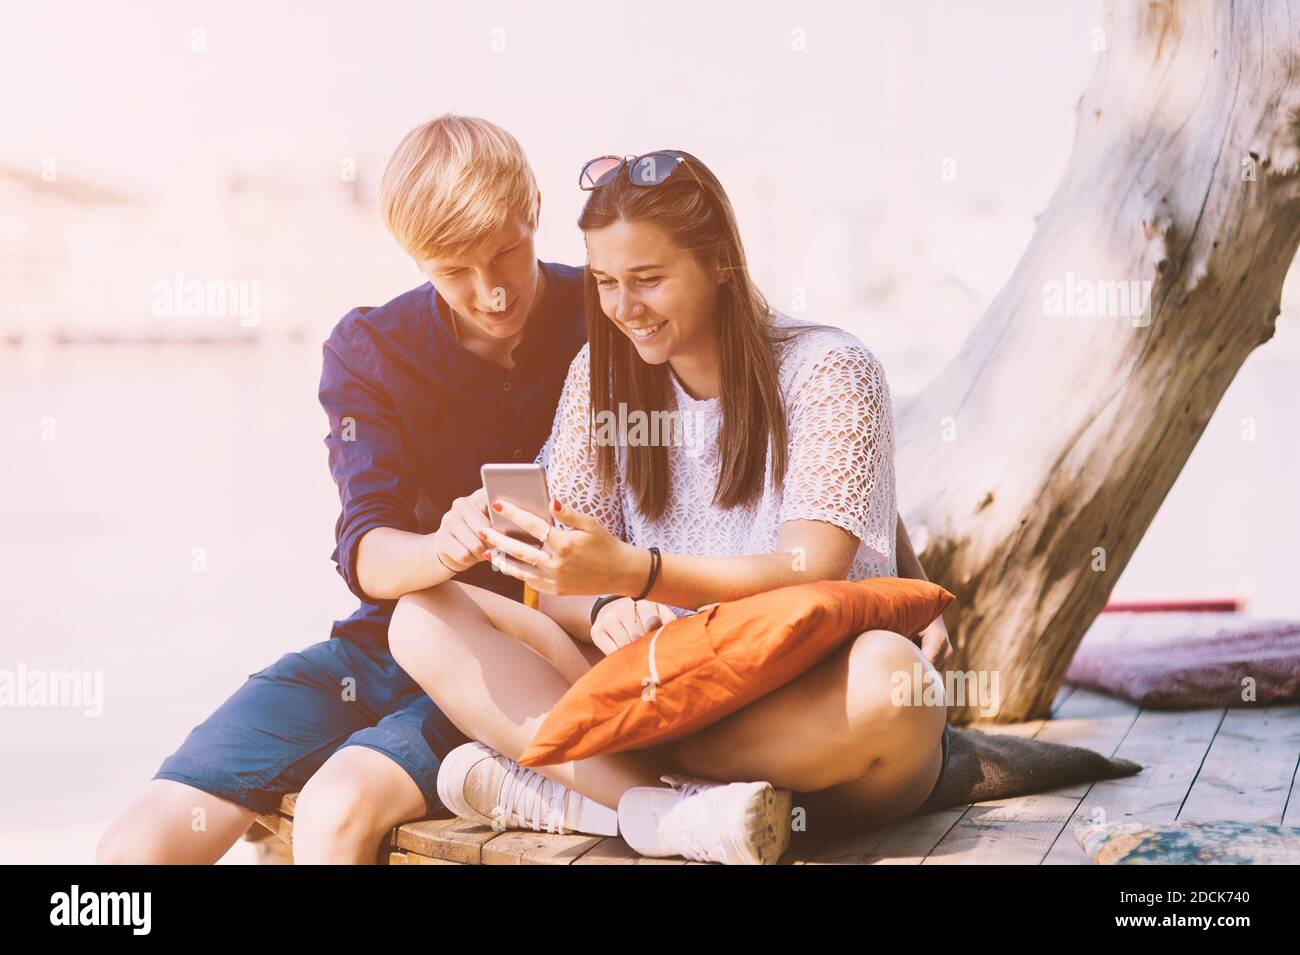 Young smiling white couple uses a smartphone on the beach in summer vacation Stock Photo